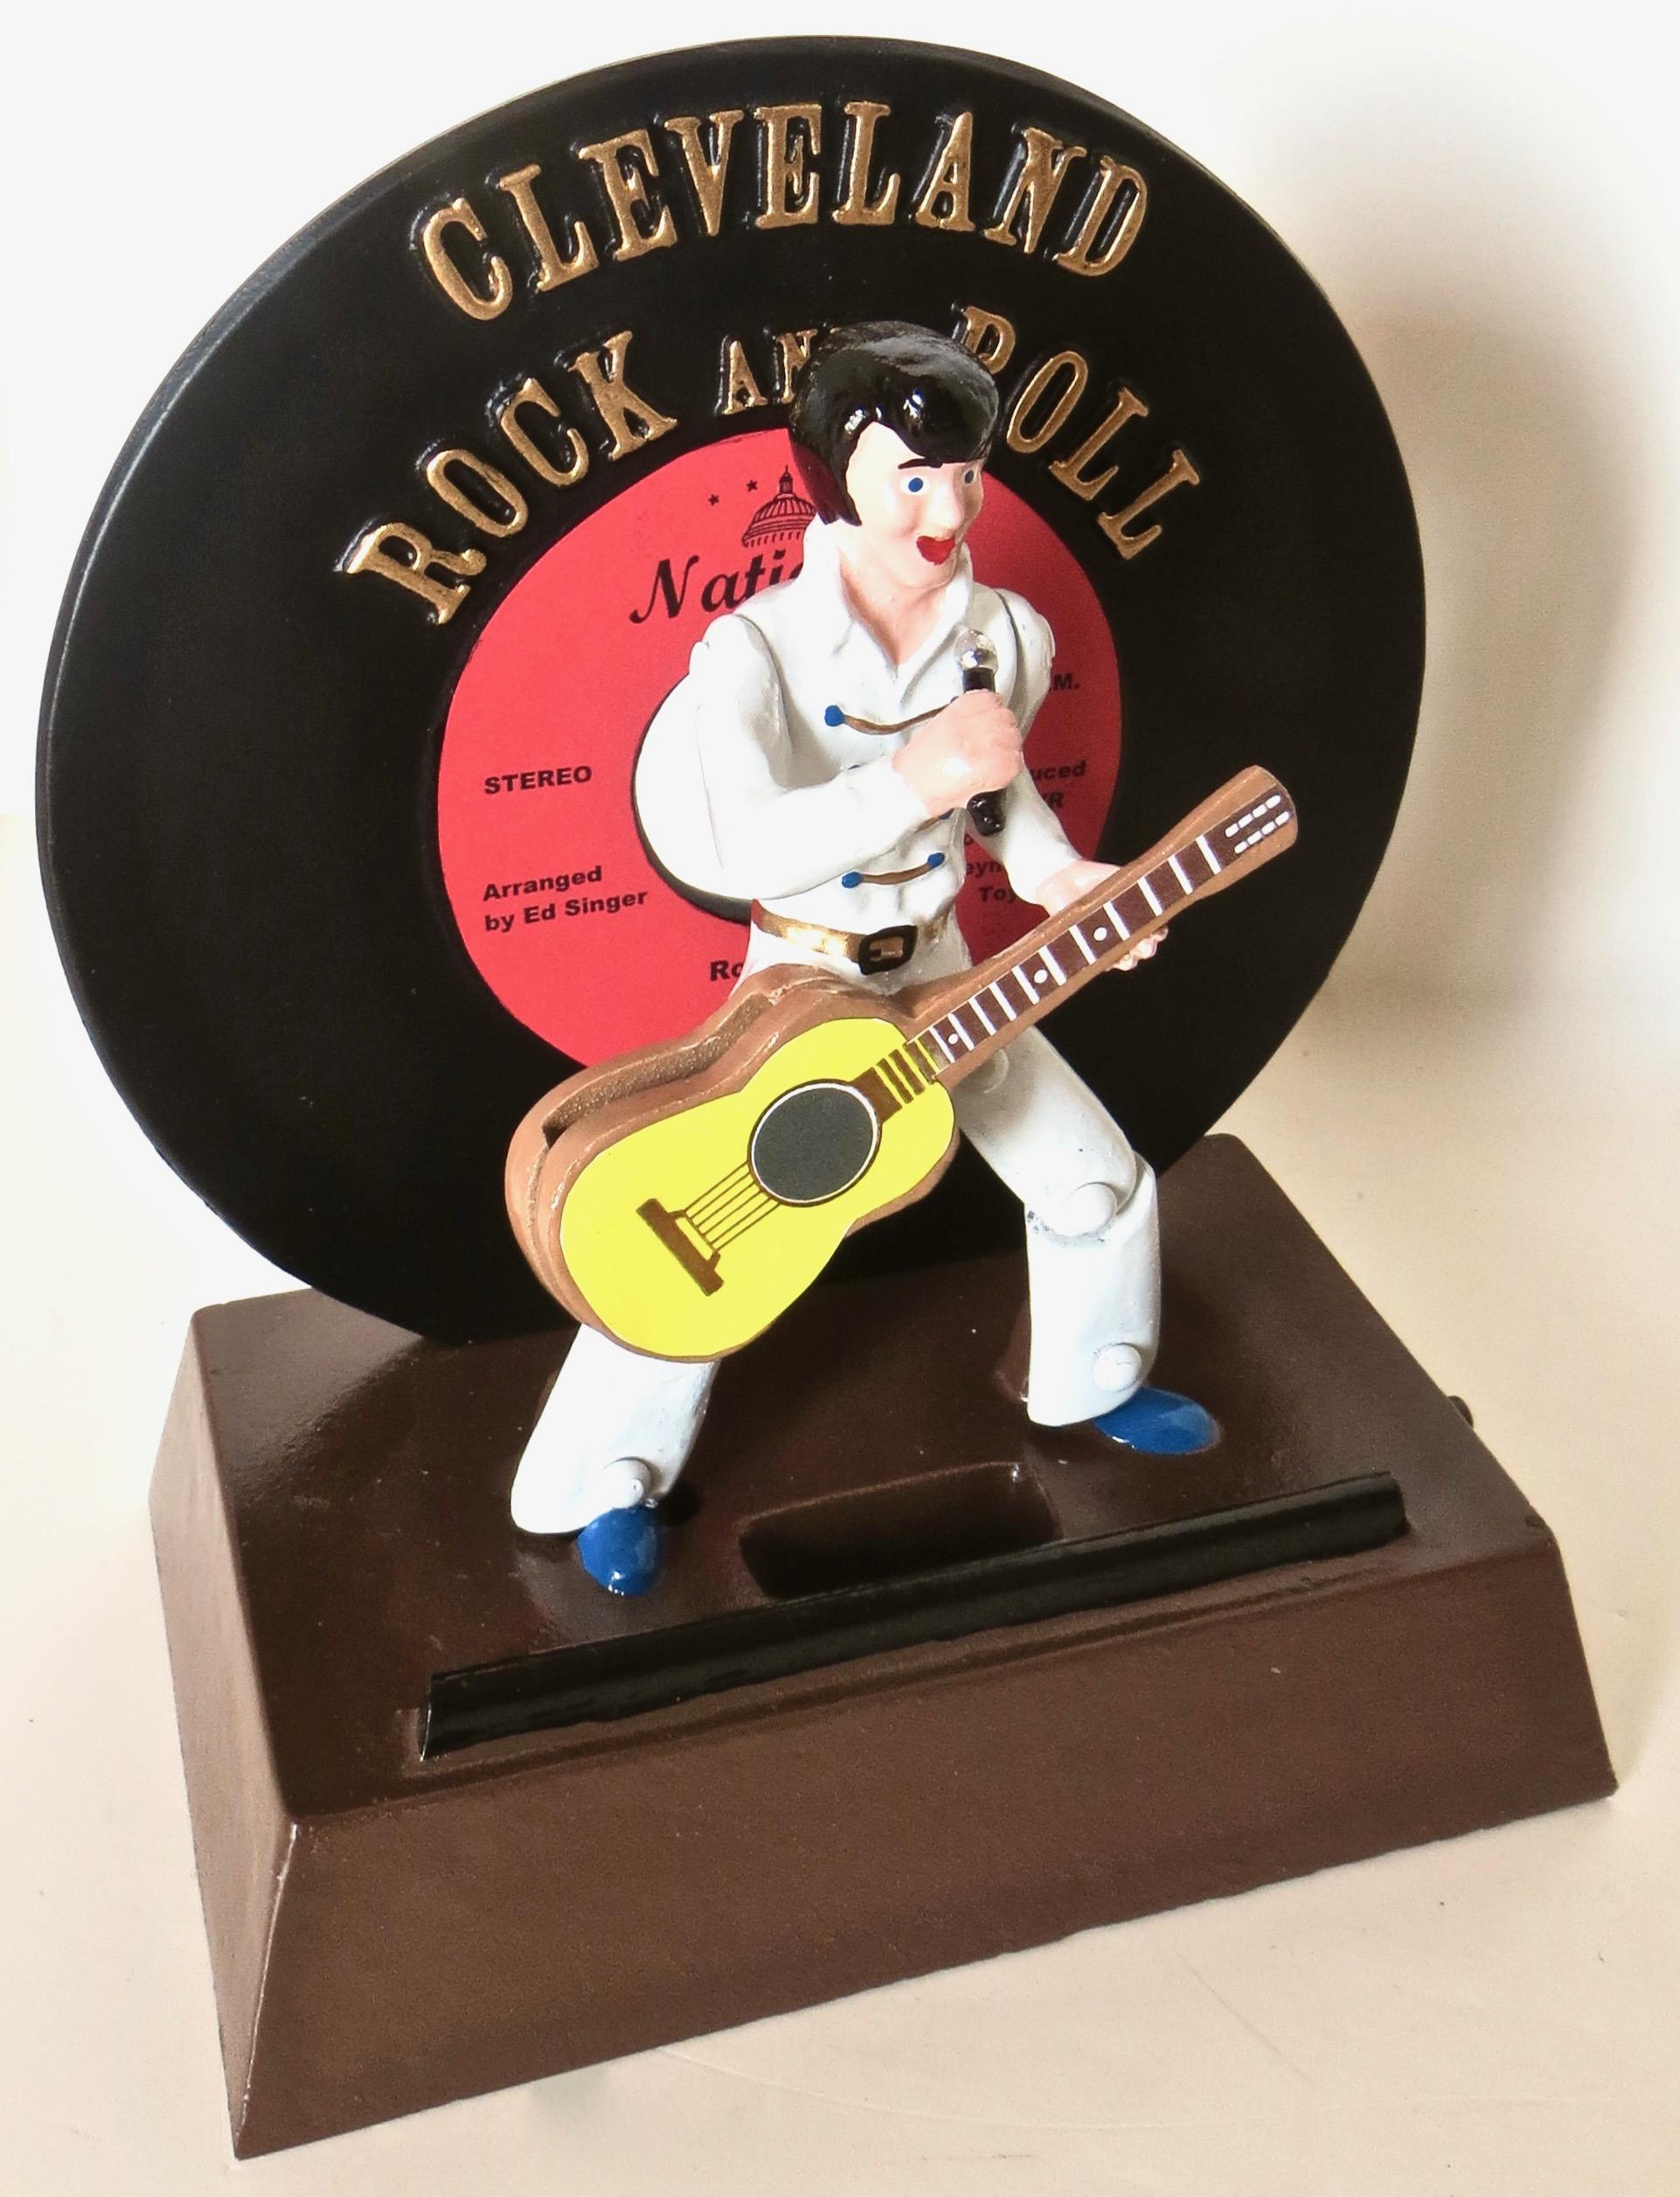 Made to commemorate the Rock and Roll Hall of Fame located in Cleveland, Ohio, this cast aluminum mechanical bank depicts Elvis Presley in full gala attire, typical of Elvis, with white suit, microphone in hand, and guitar fronting his rock and roll